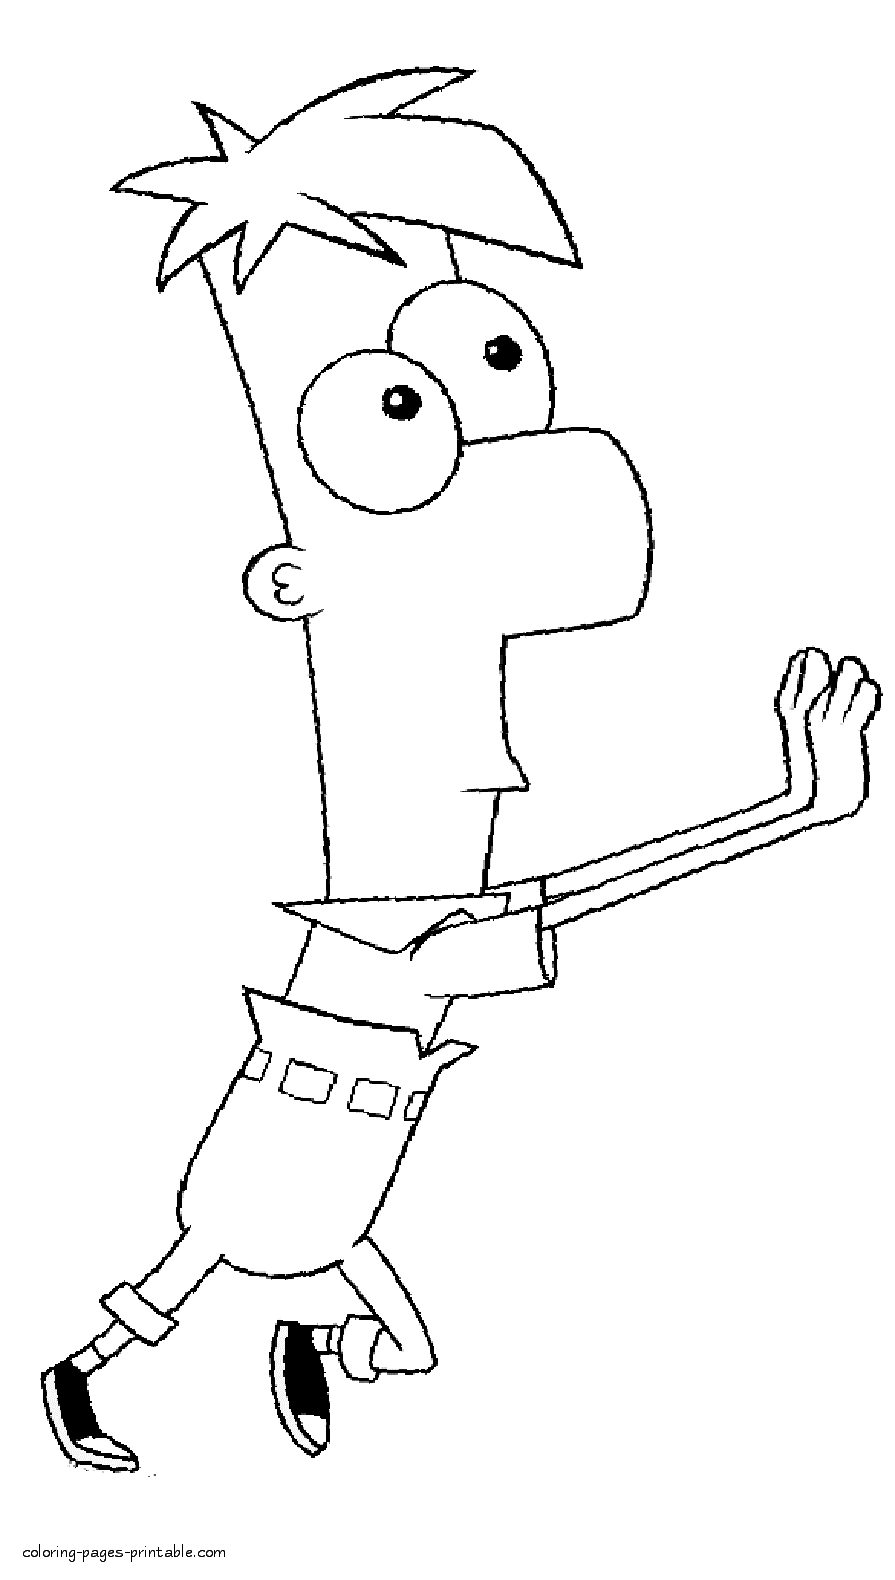 Printable coloring page of Ferb